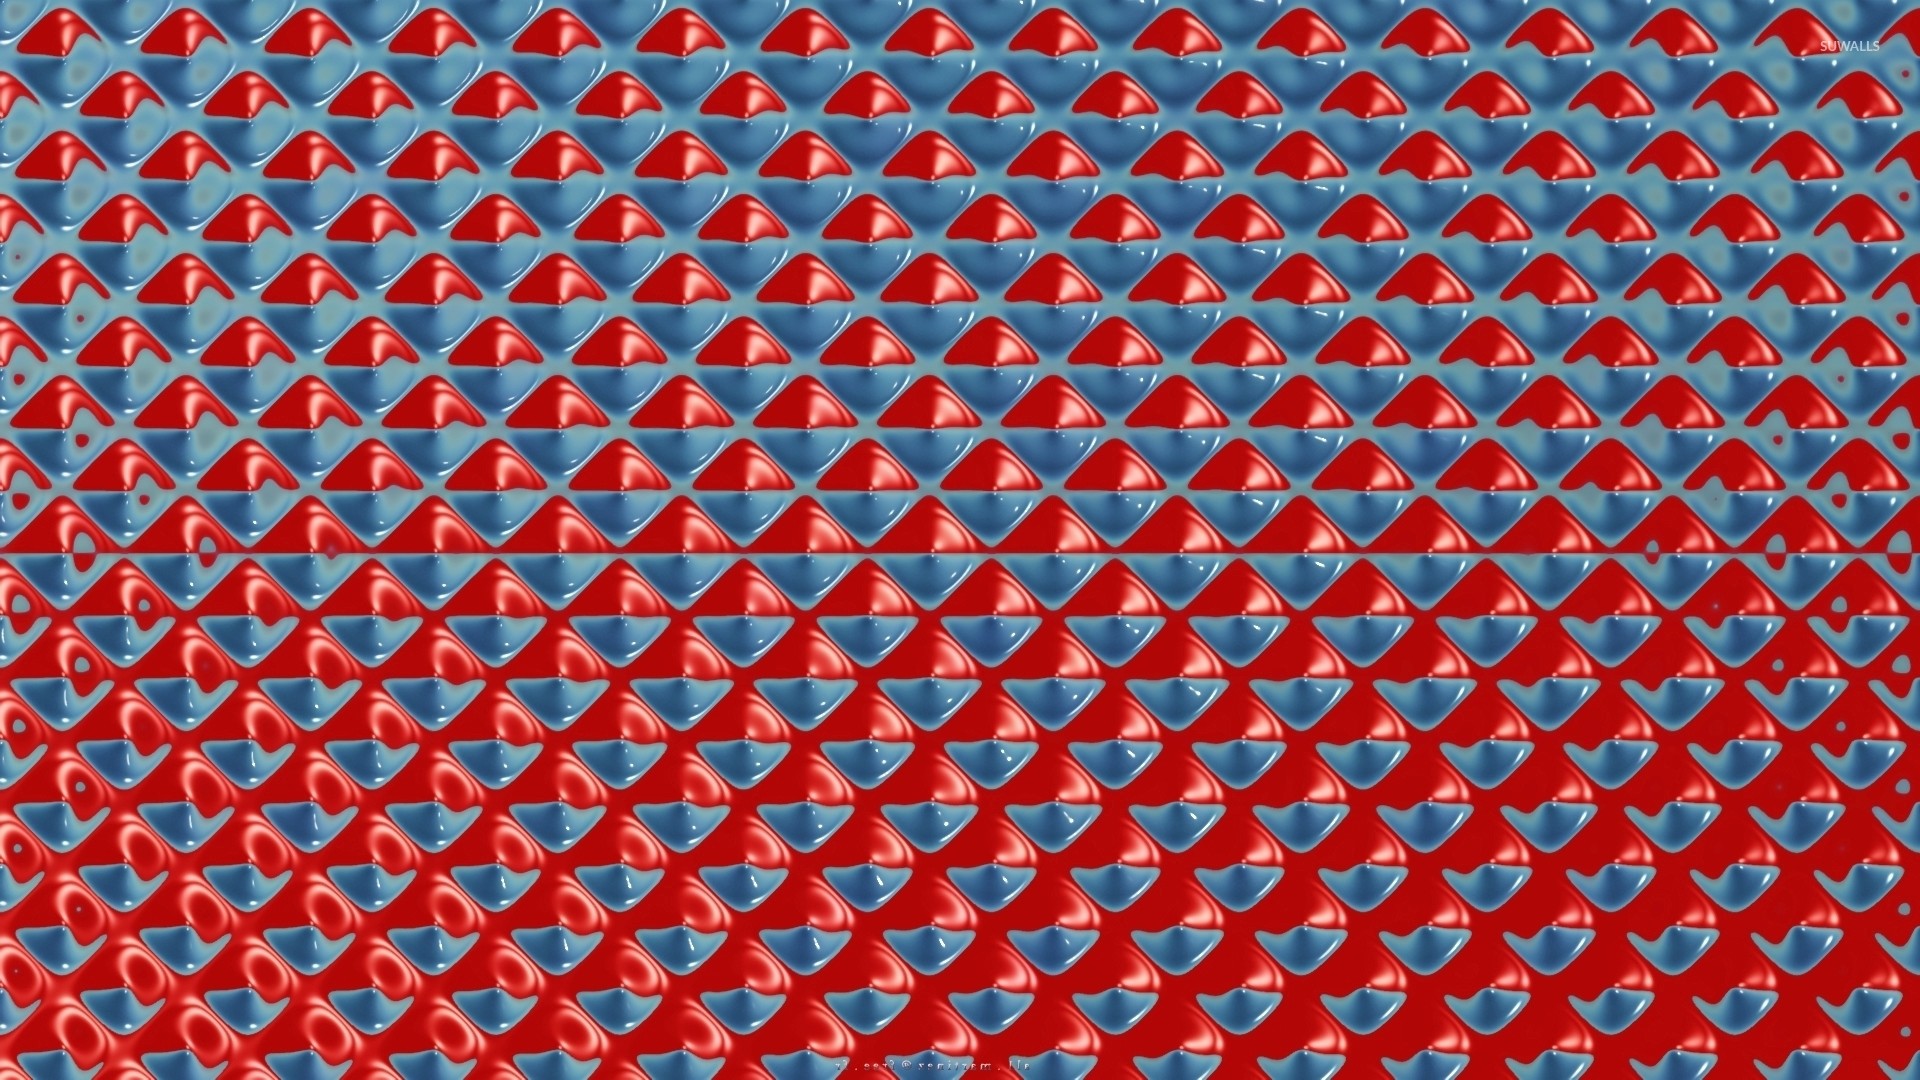 1920x1080 Red and blue hypnotic shapes wallpaper